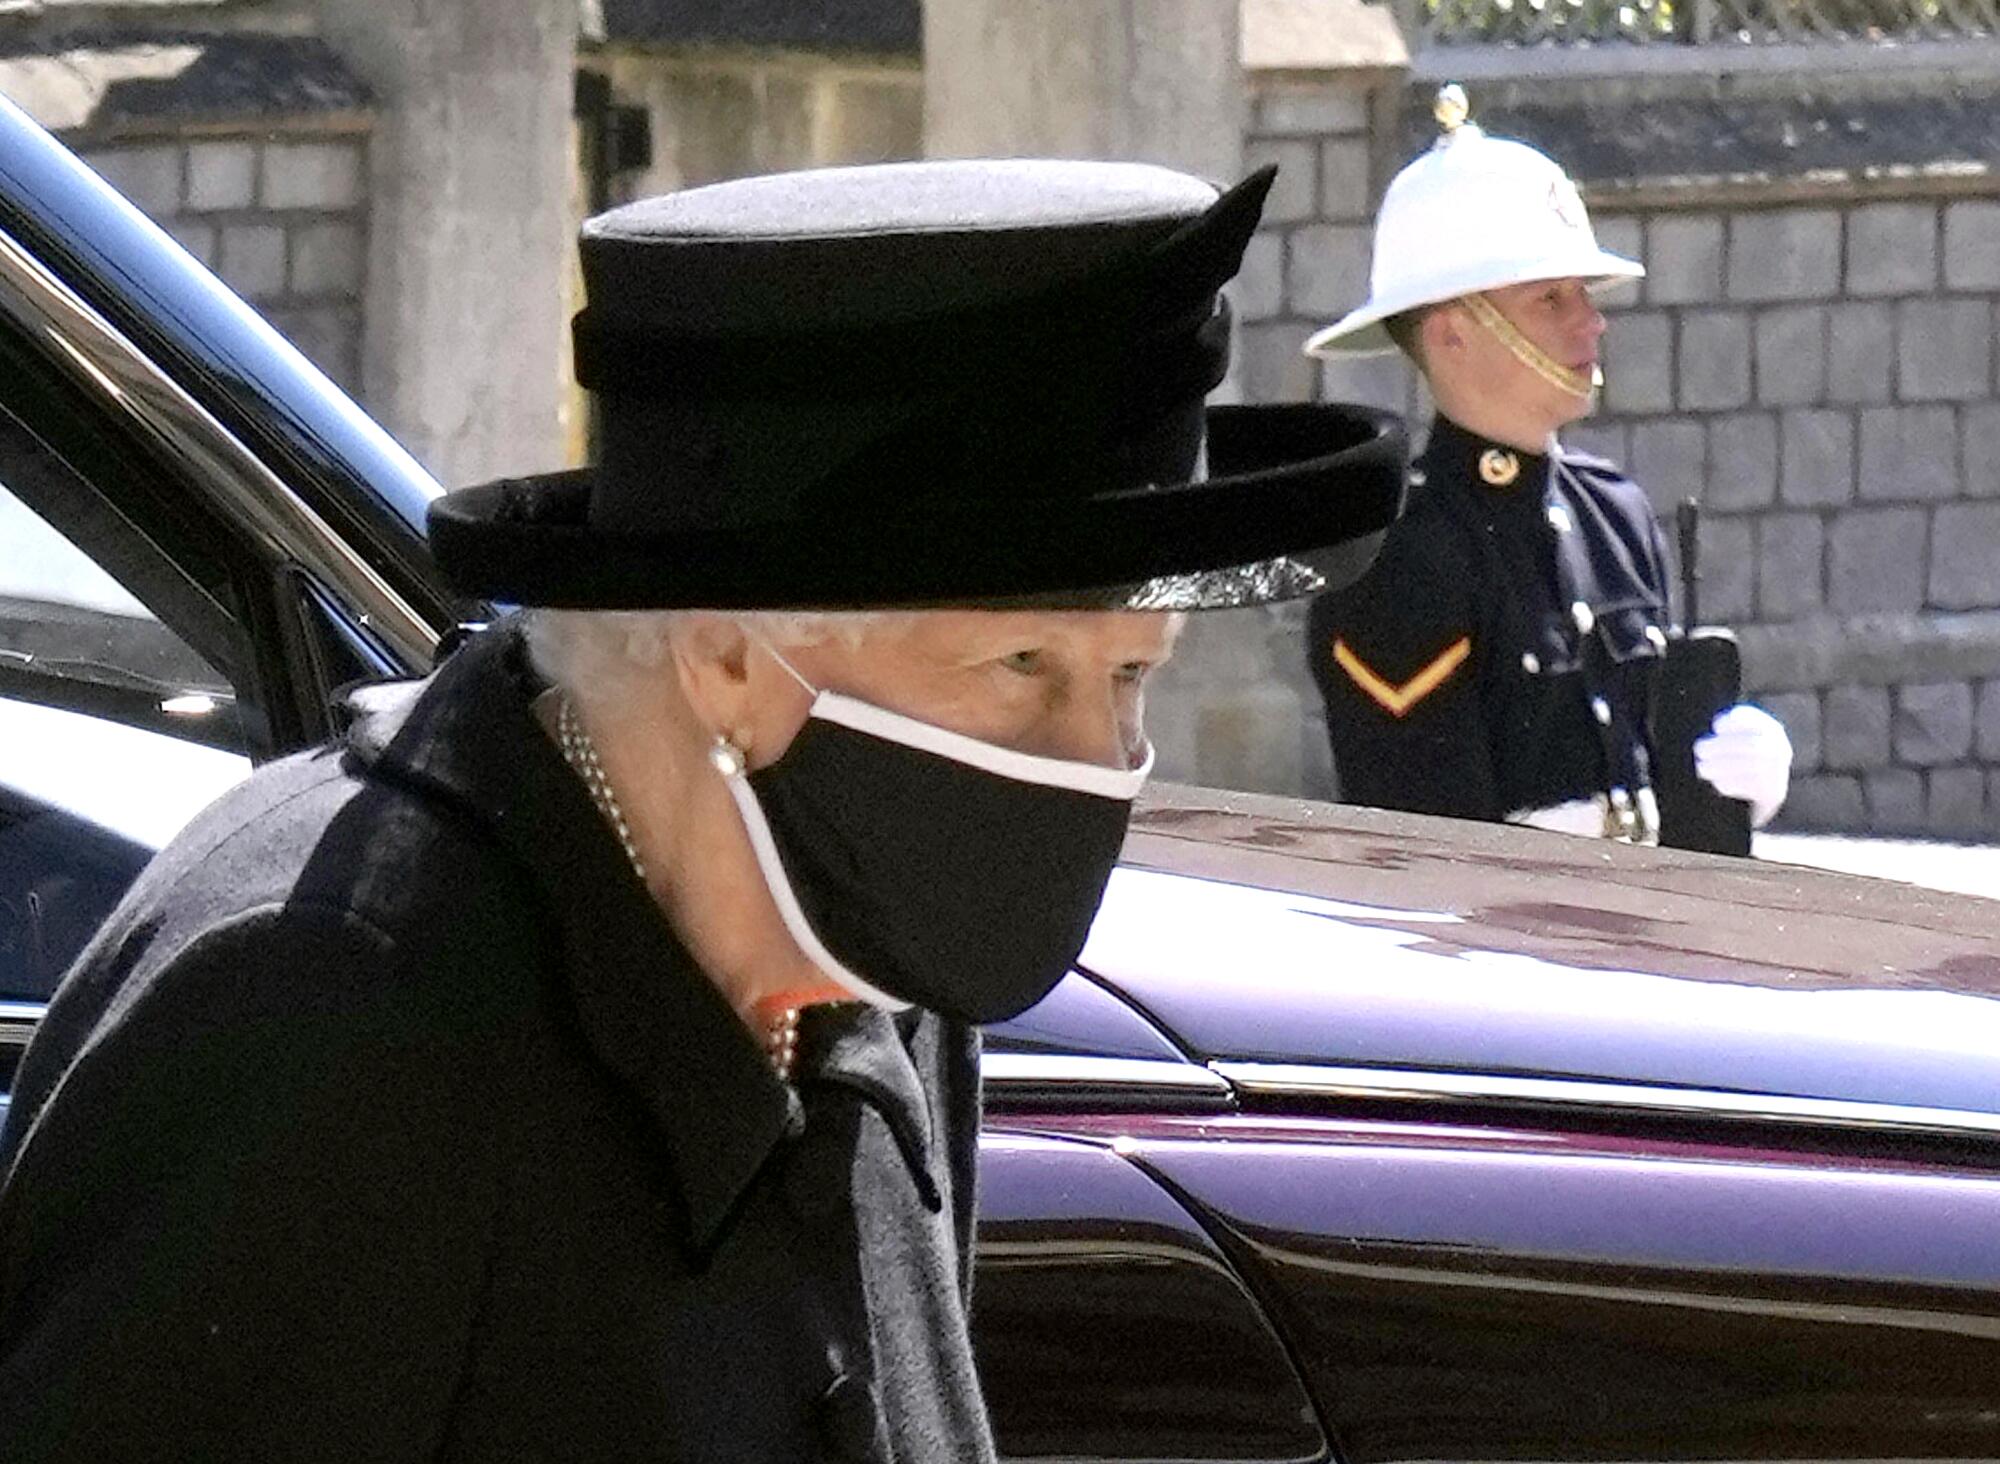 Queen Elizabeth II next to a car at Windsor Castle while a military member stands nearby.